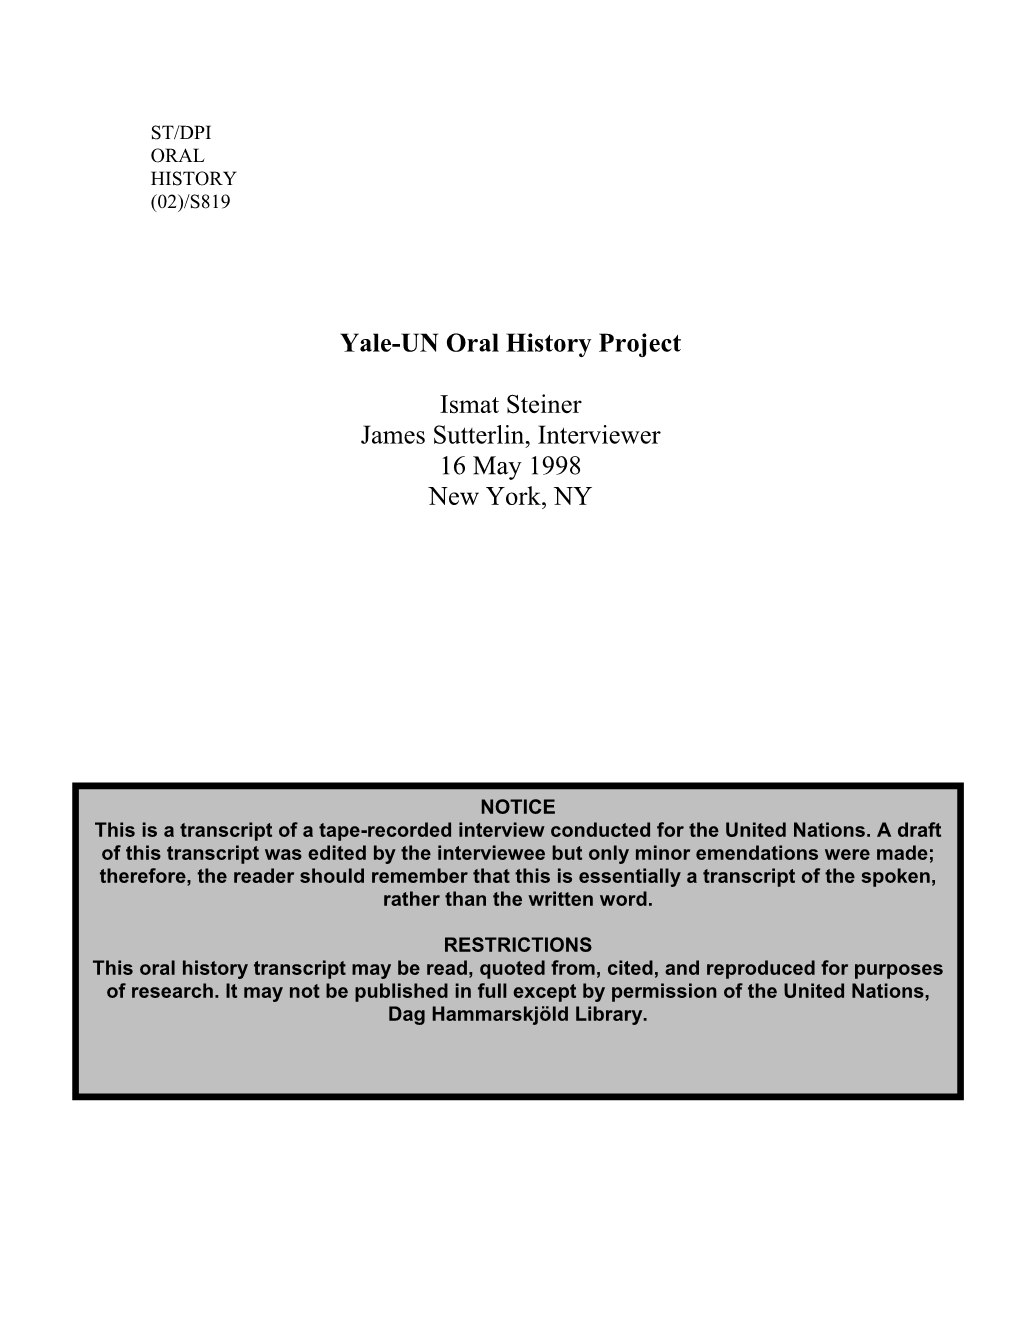 Yale-UN Oral History Project Ismat Steiner James Sutterlin, Interviewer May 16, 1998 New York, NY